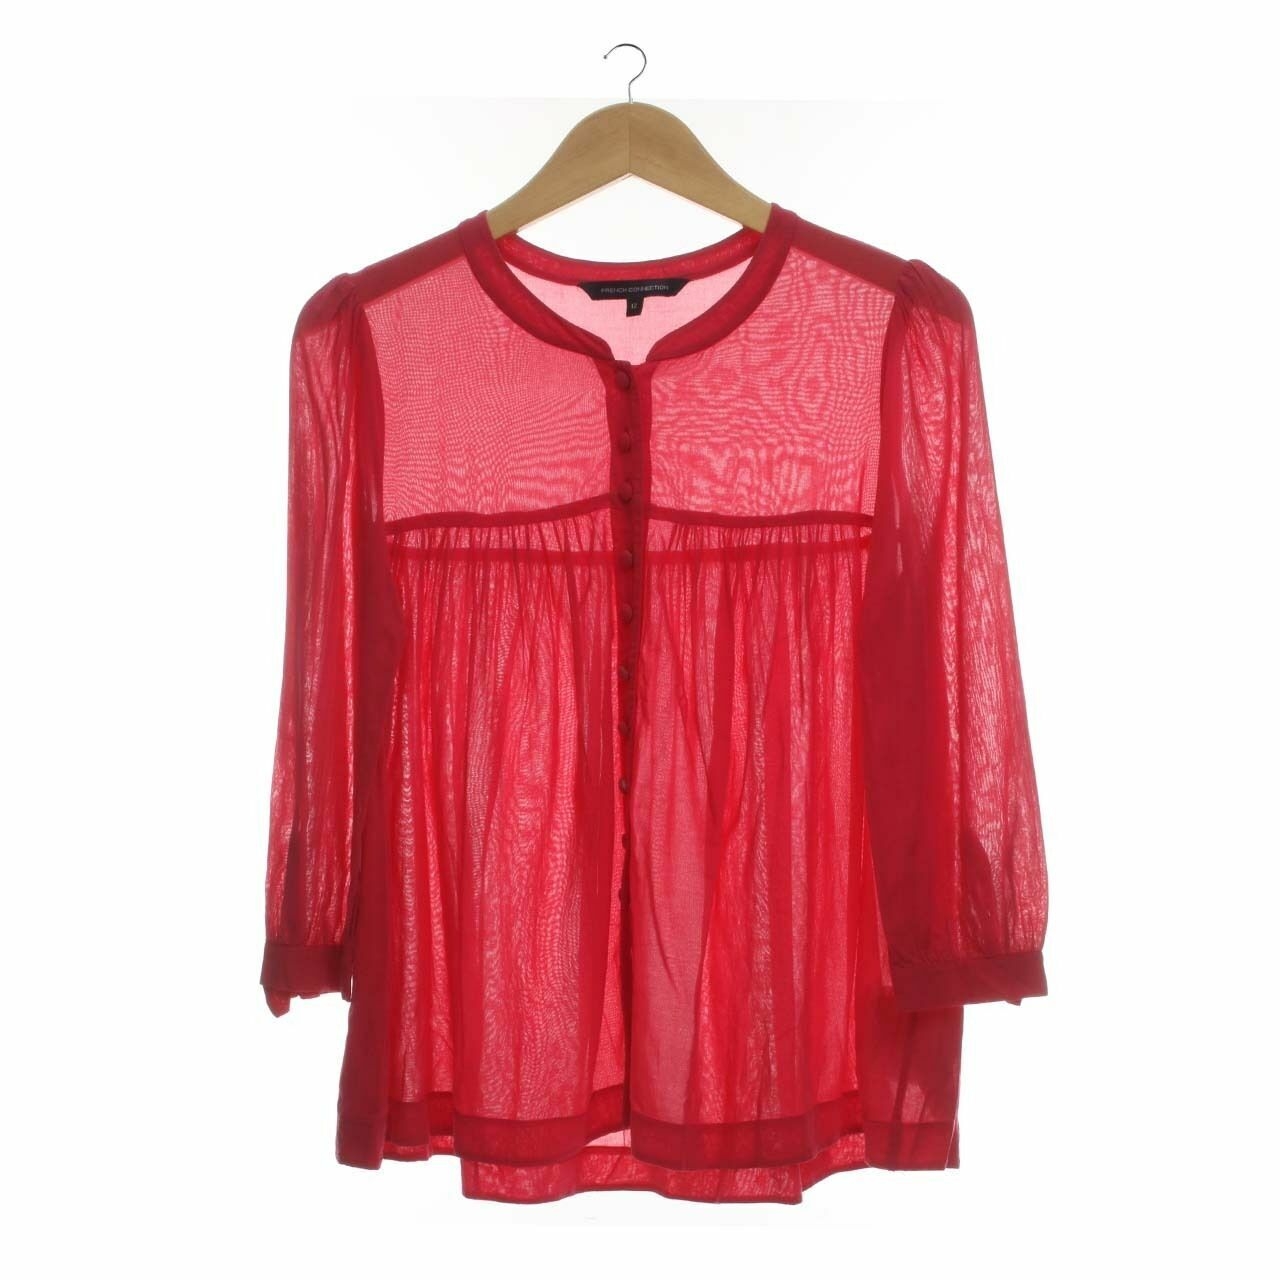 French Connection Dark Pink Blouse